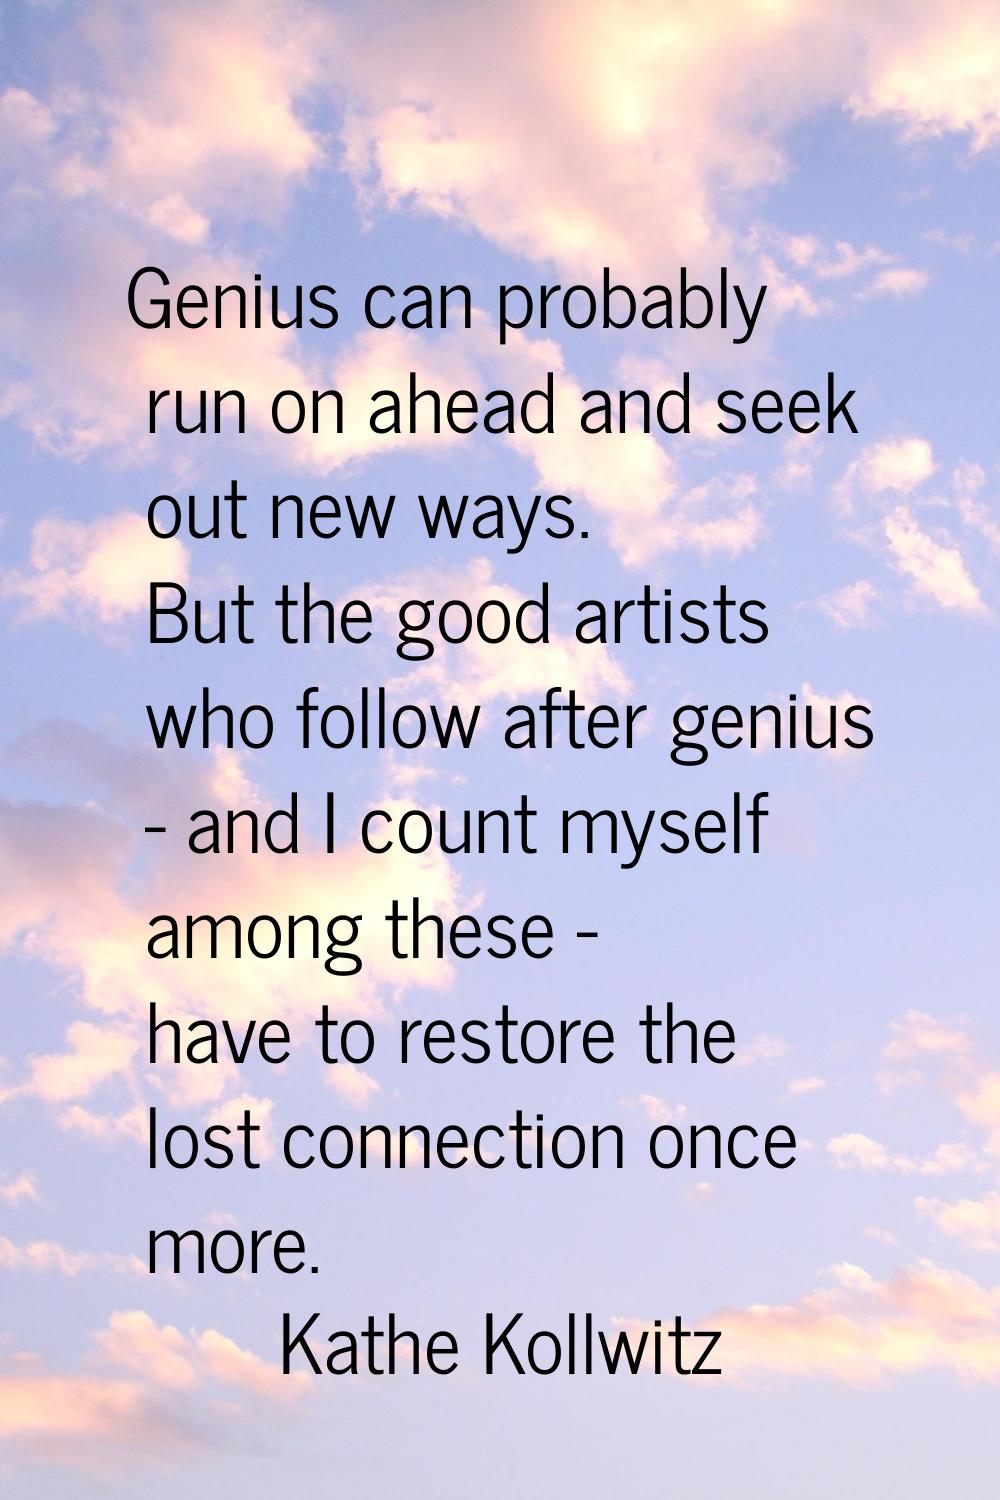 Genius can probably run on ahead and seek out new ways. But the good artists who follow after geniu